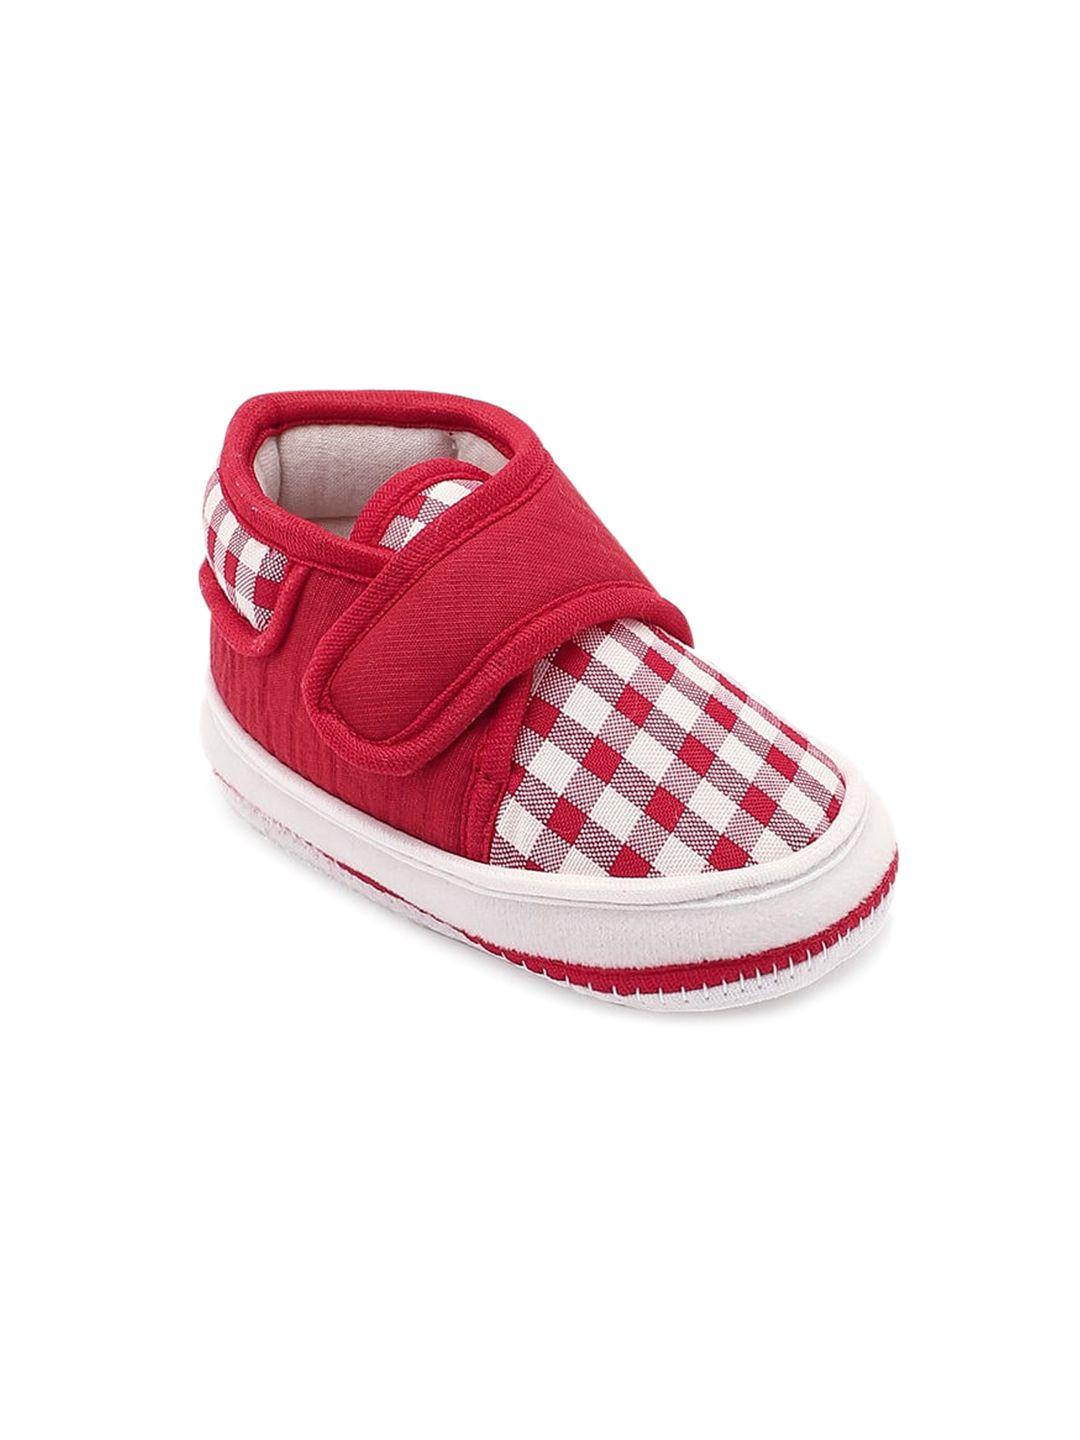 chiu infant checked cotton booties